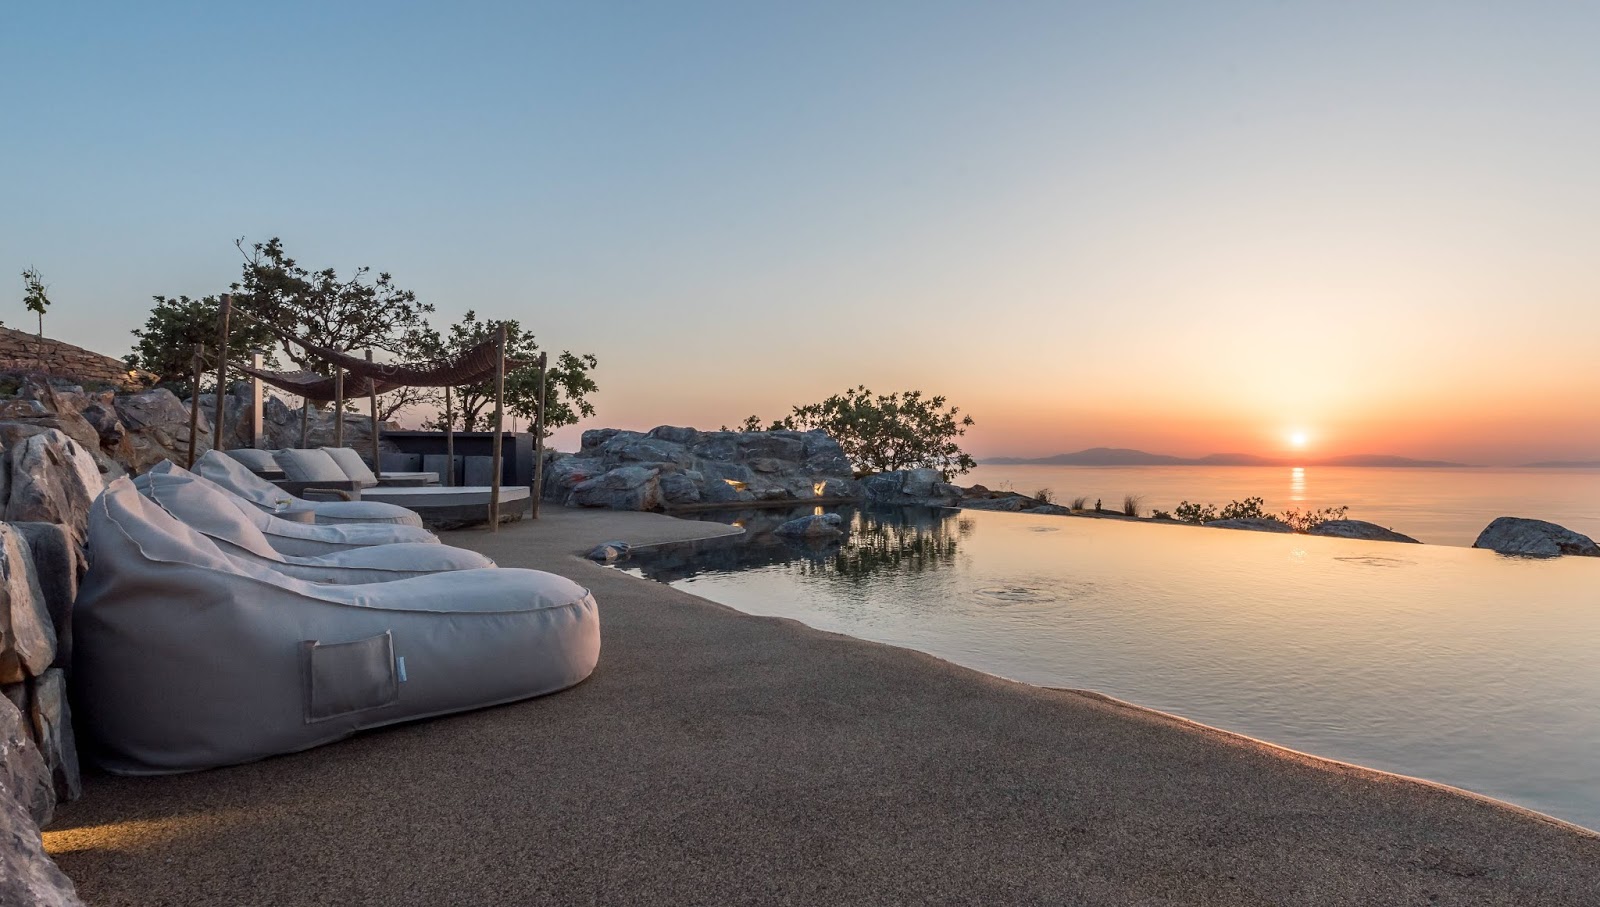 If you're looking to turn a dream into a reality (for a hefty price), you can have this backyard view in Greece all to yourself. #backyard inspiration via www.L-2-Design.com